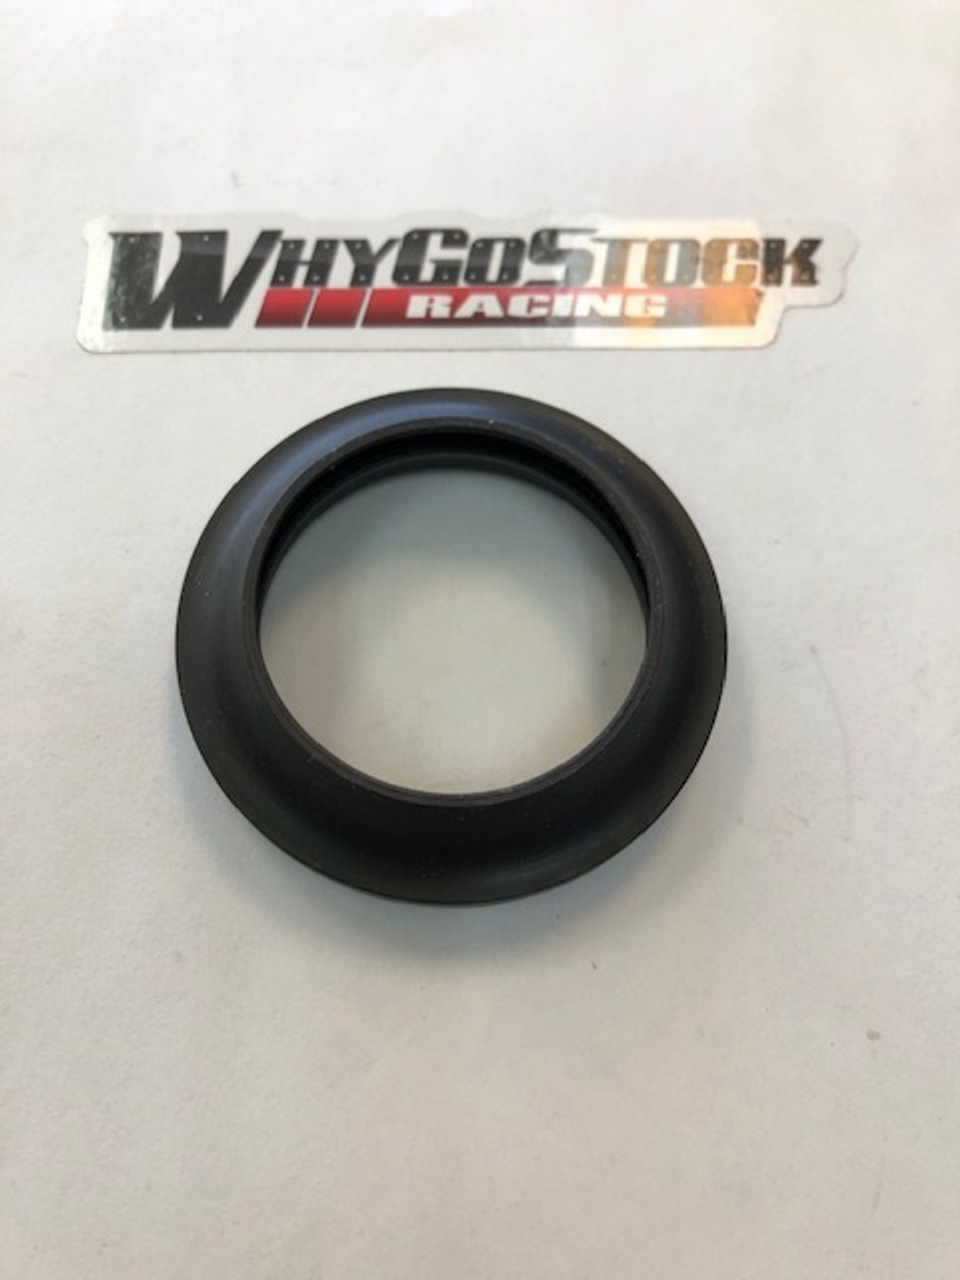 Dust Seal 2013 and newer GT650R, GT650and GV650